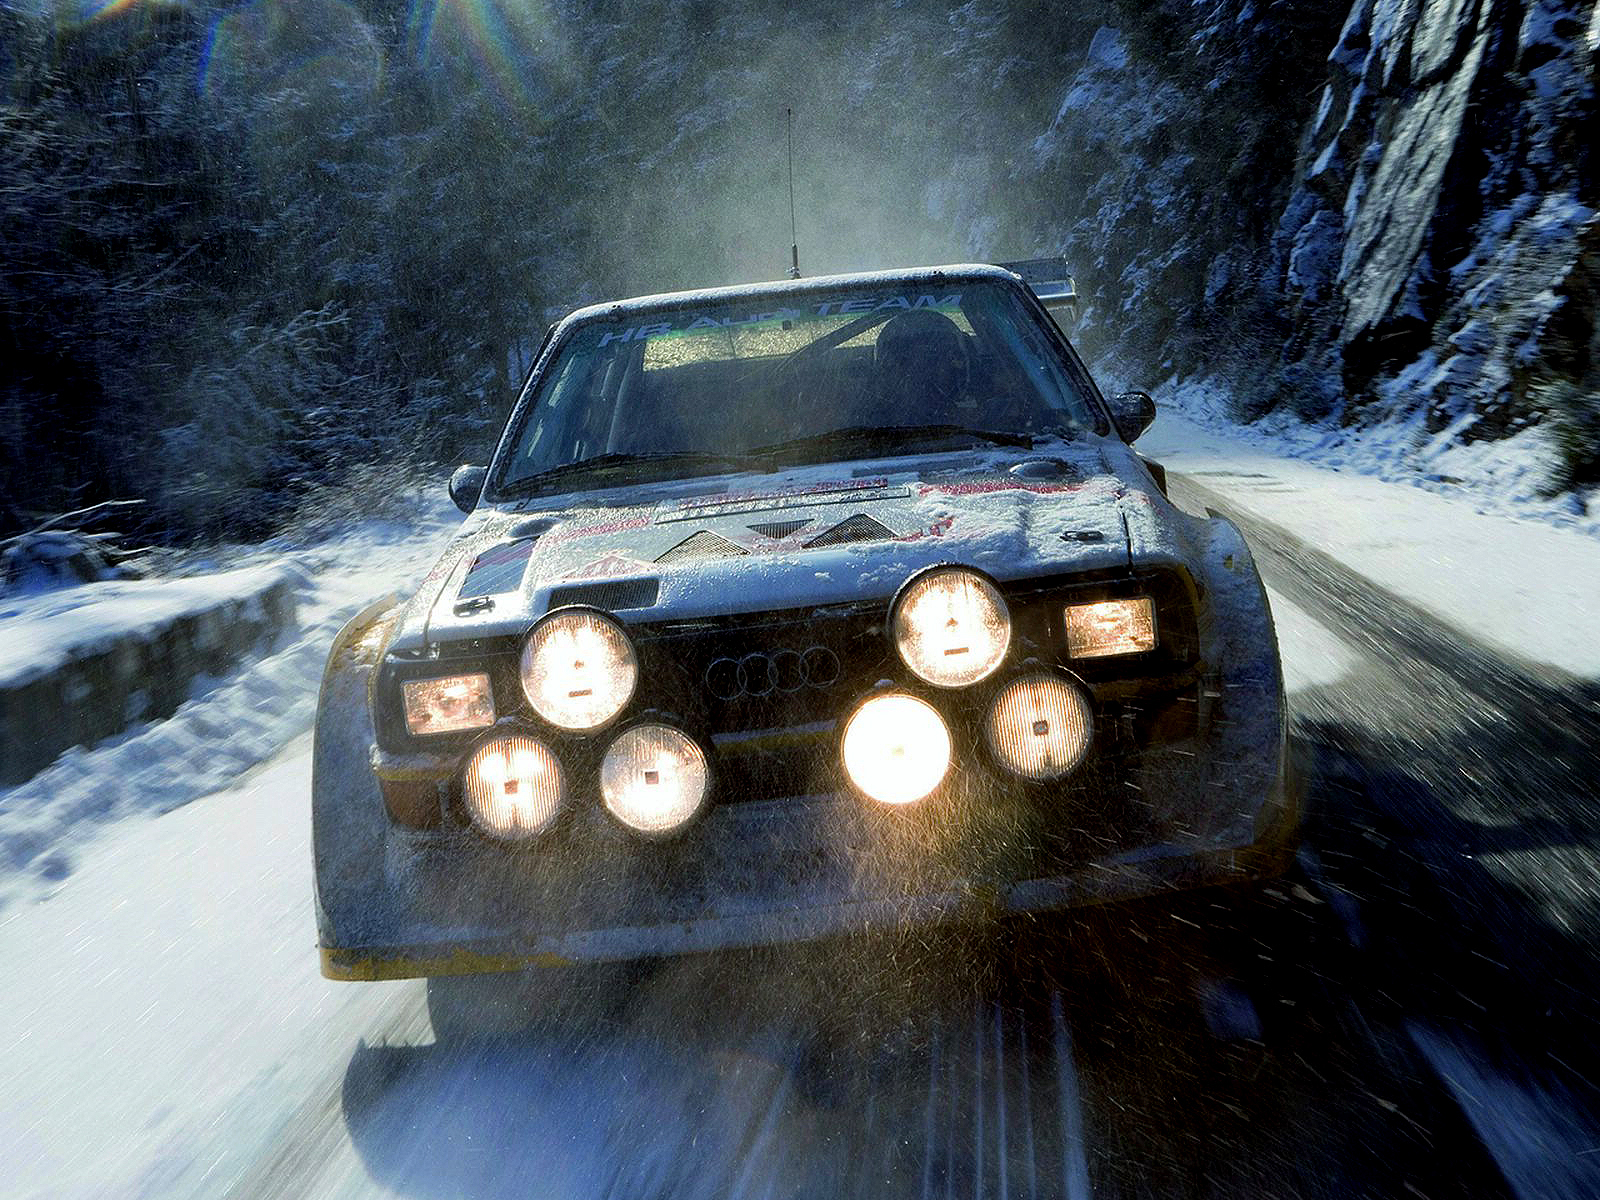  Sport Quattro S1 Group B Rally Car Wallpapers Cool Cars Wallpaper